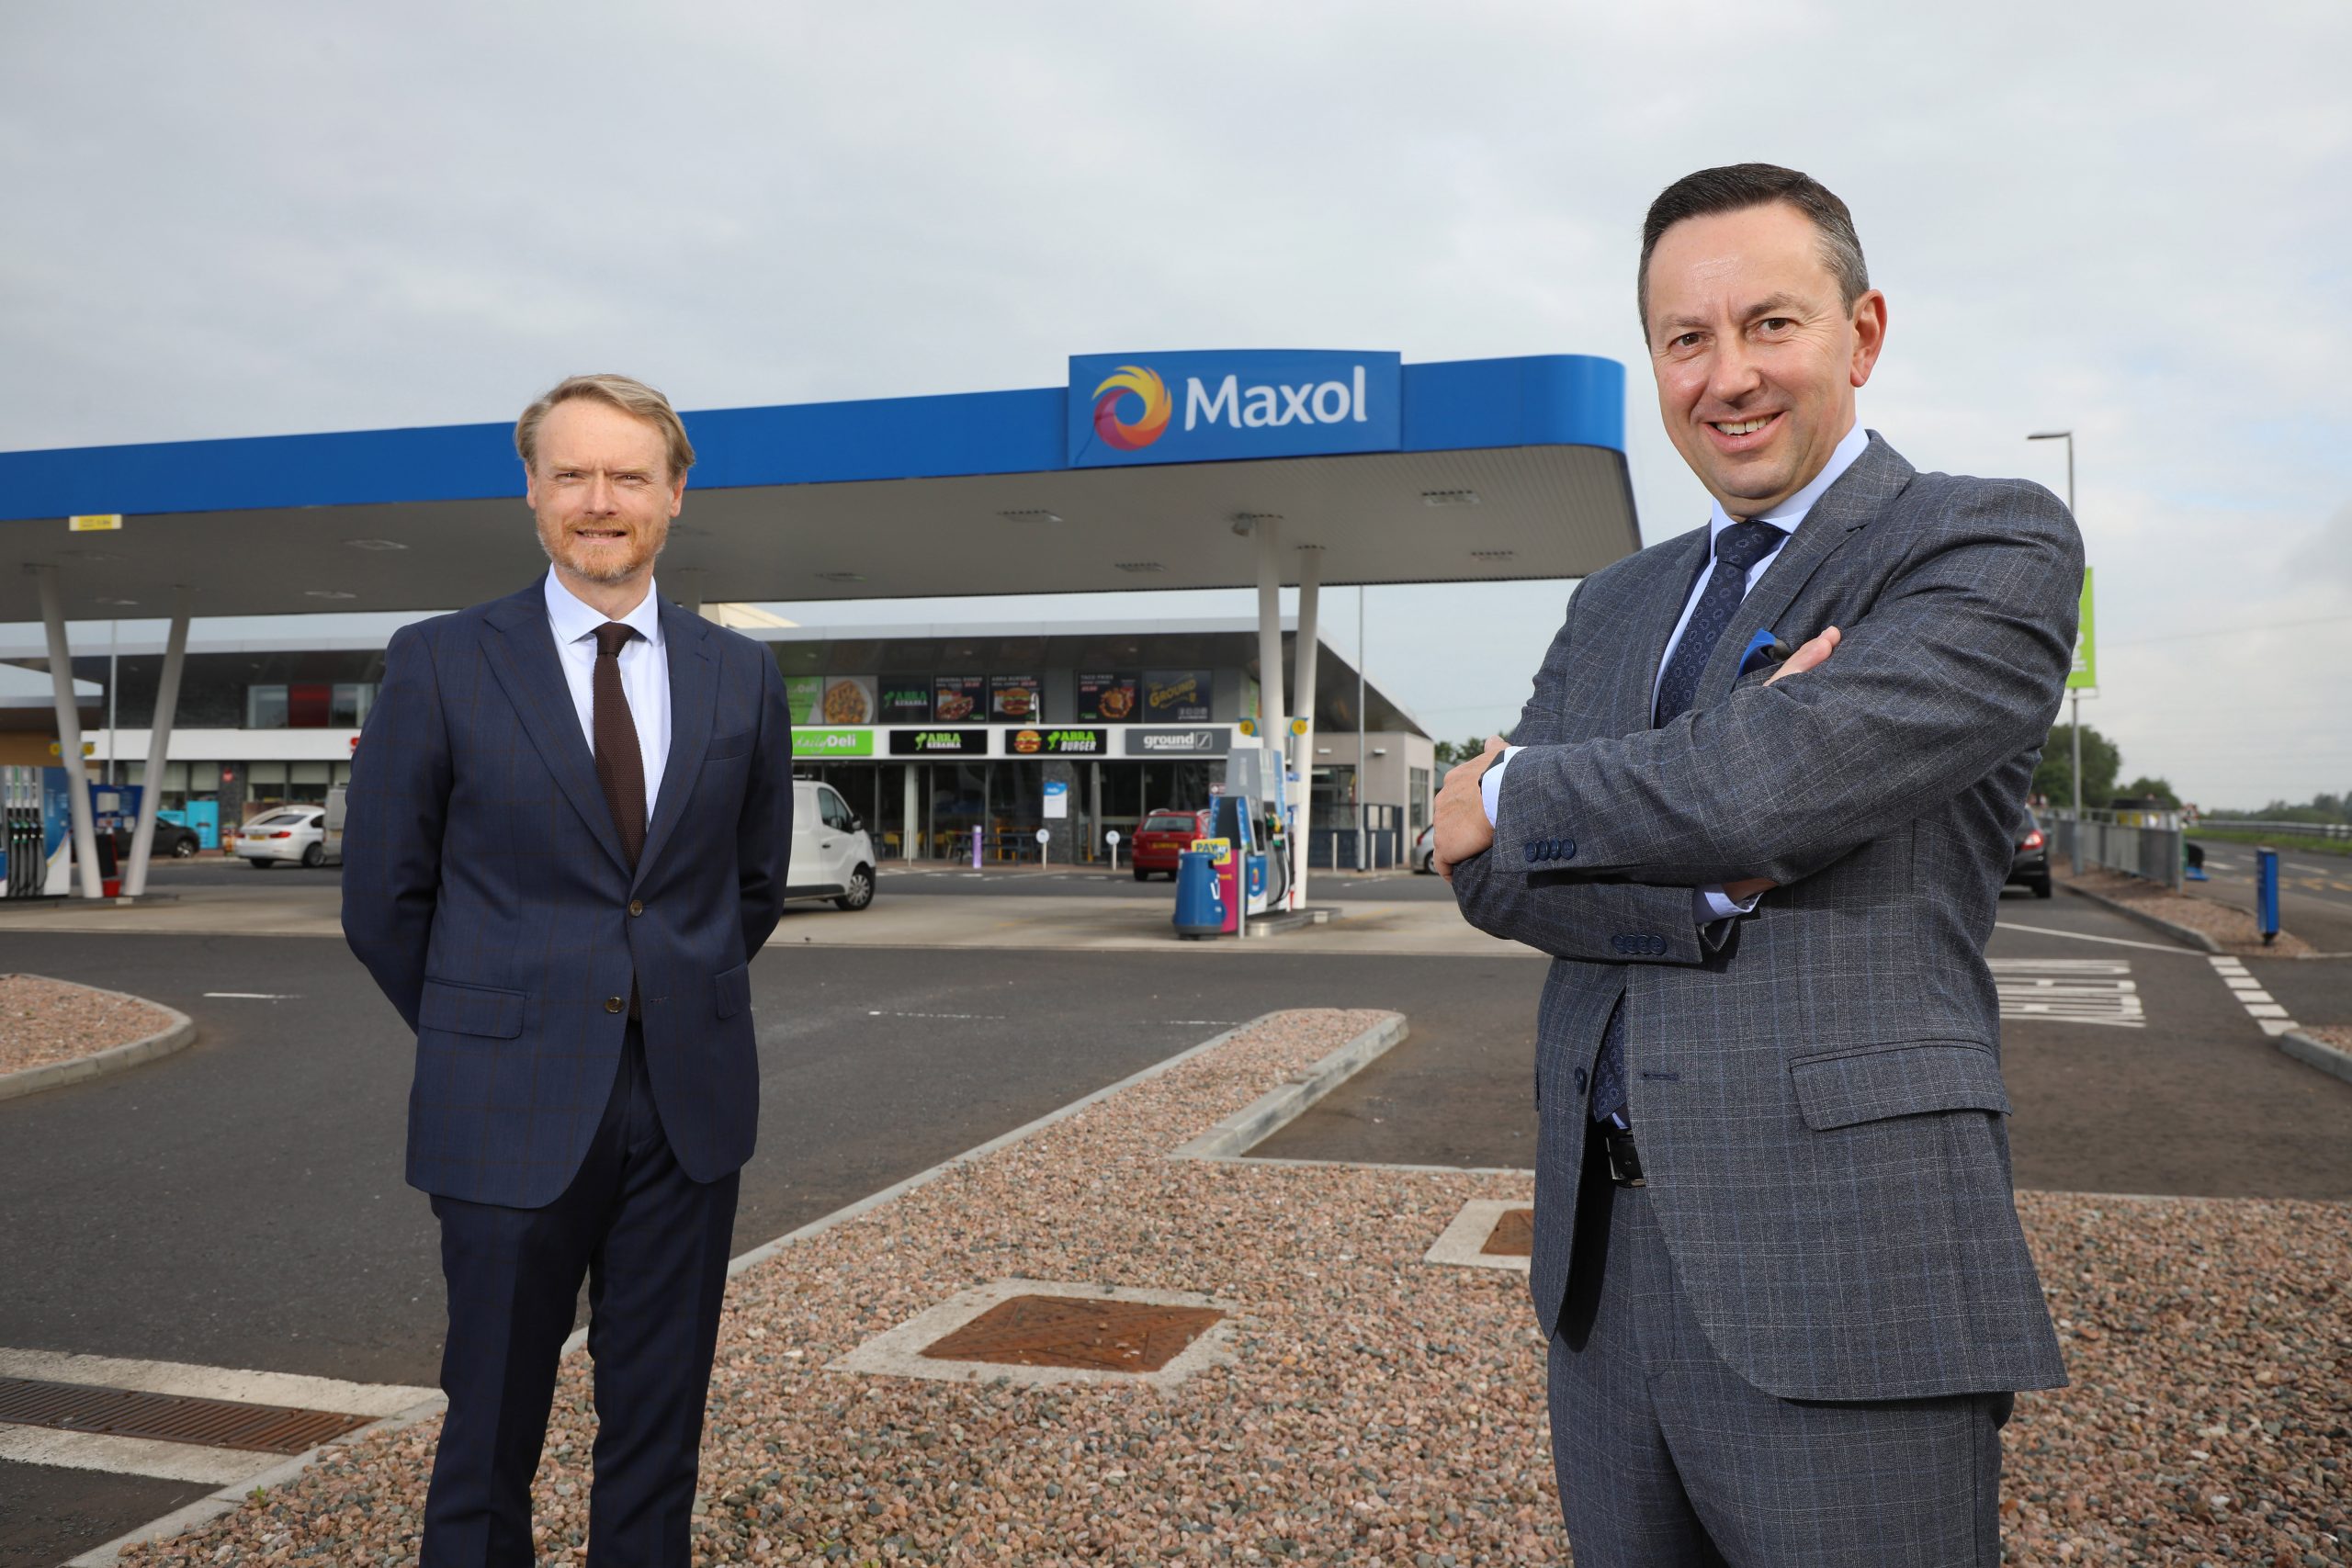 Maxol completes £120,000 investment at A26 Tannaghmore